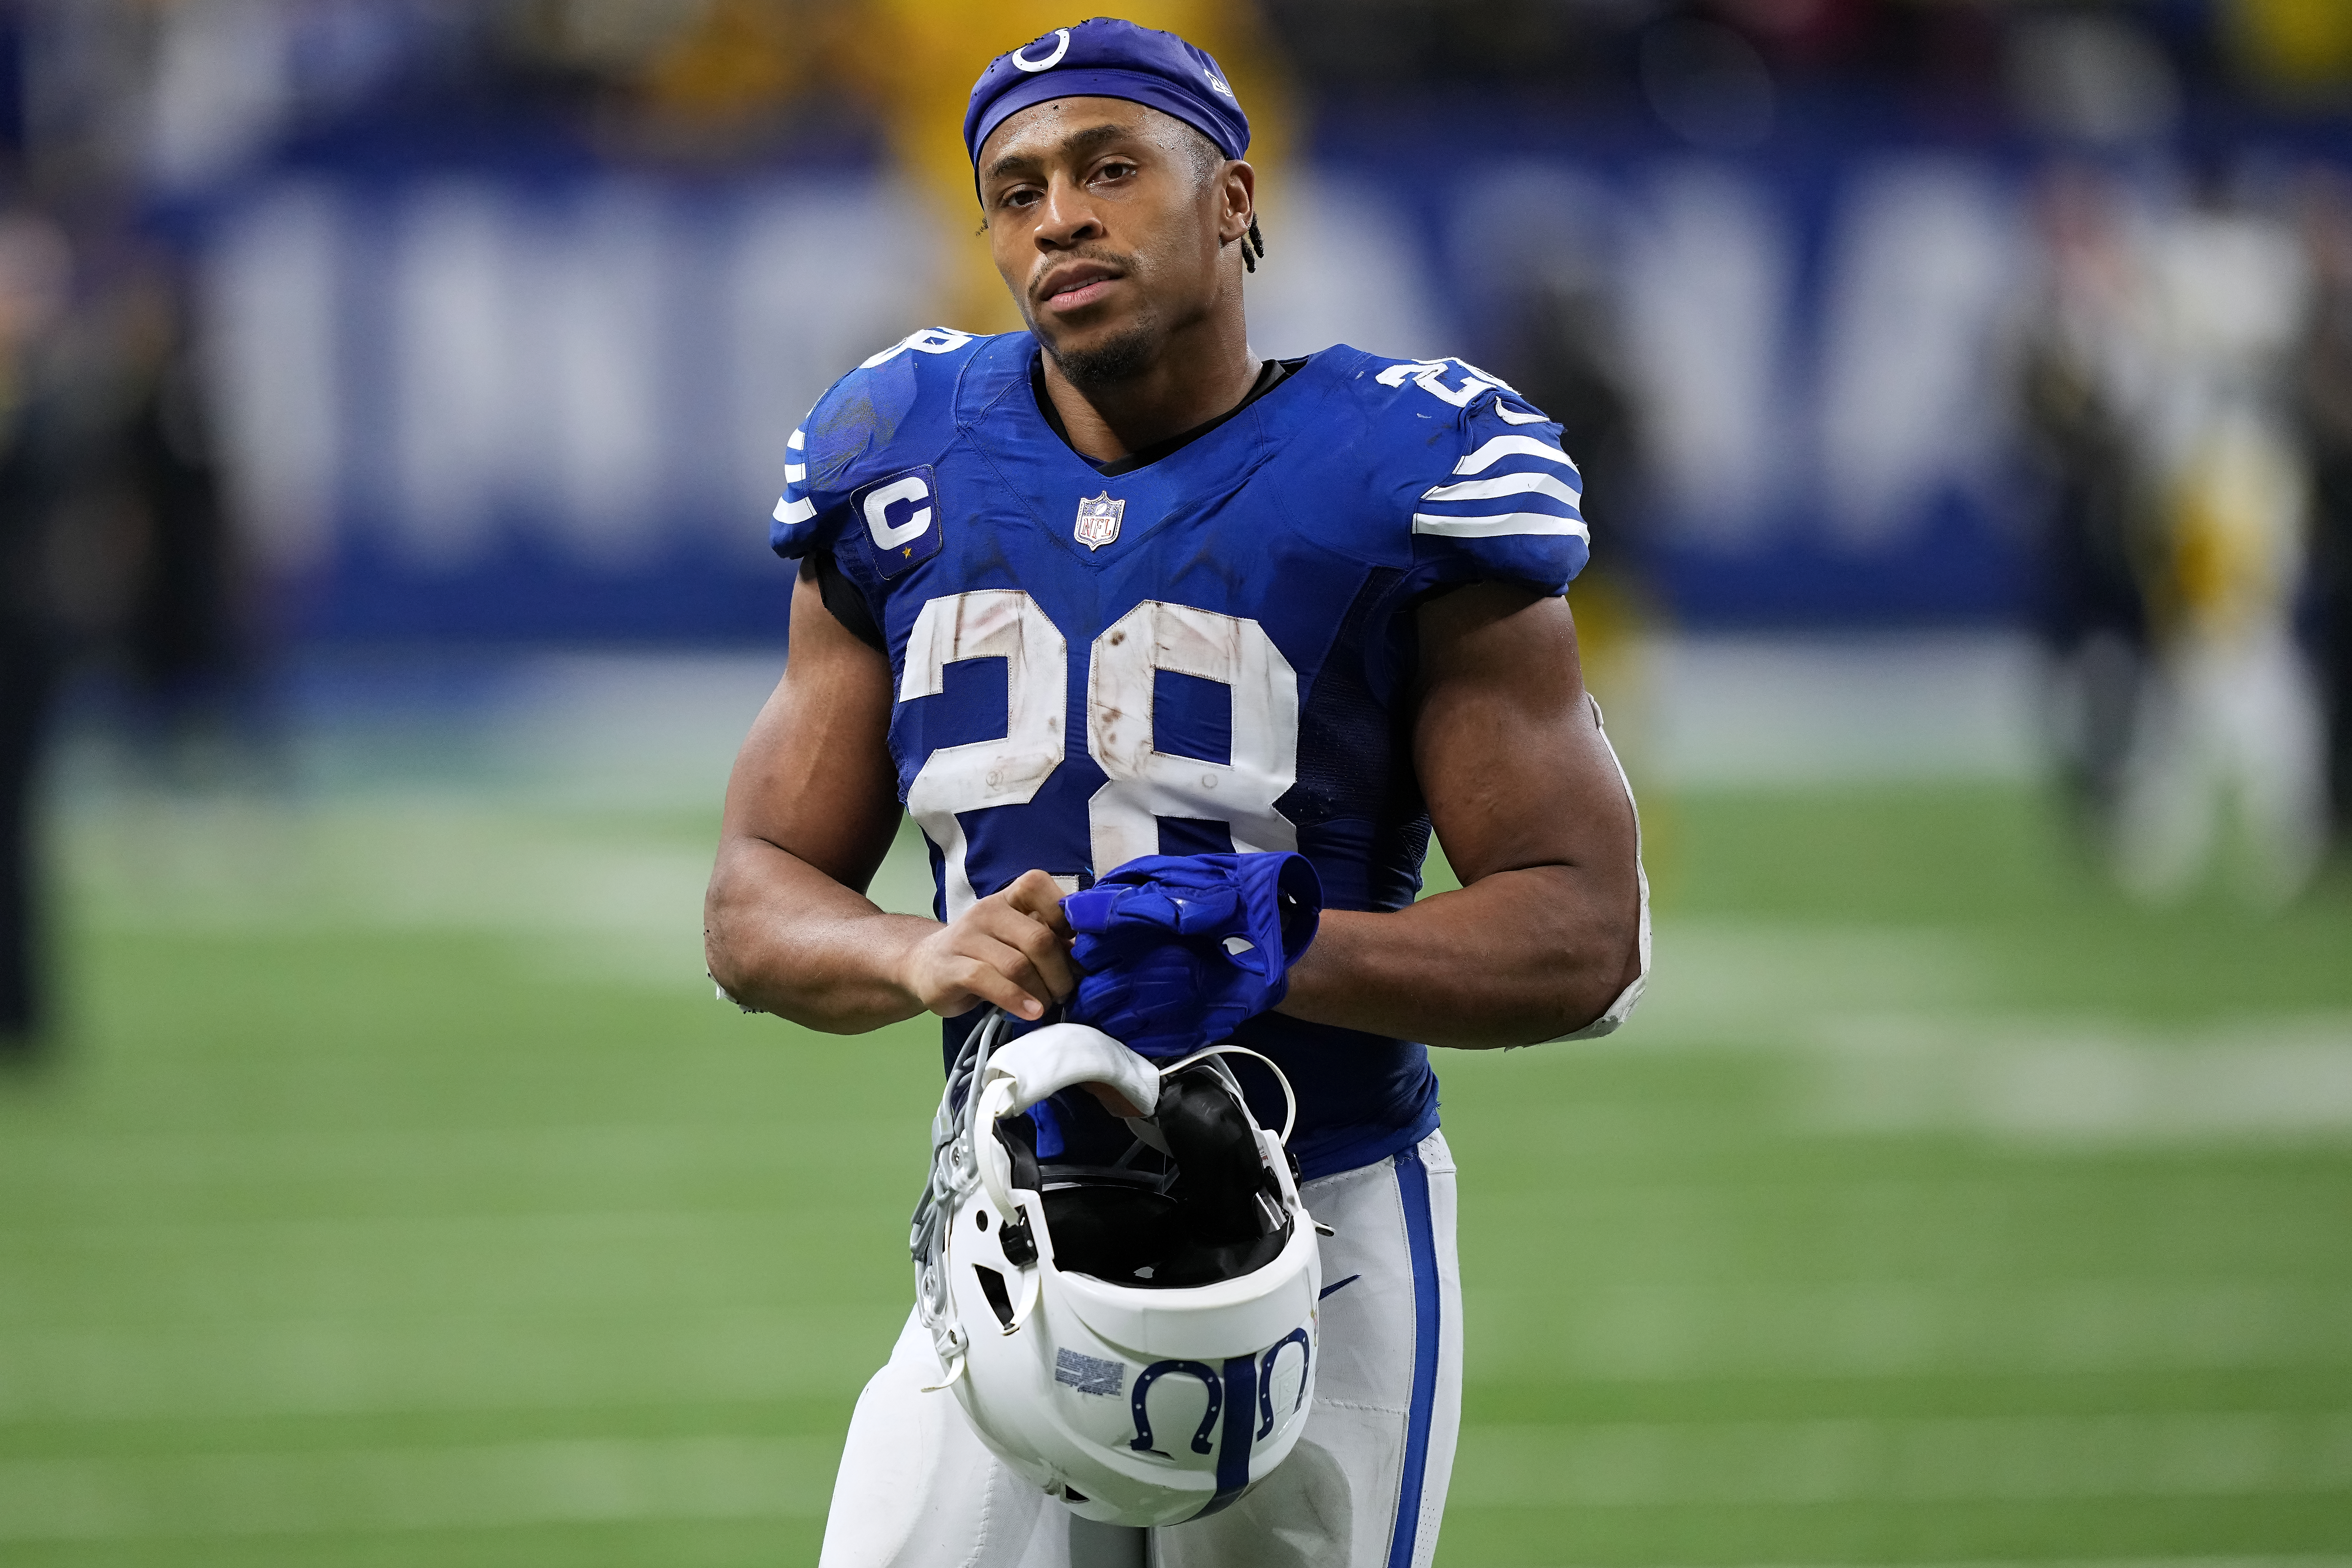 Running back Jonathan Taylor of the Indianapolis Colts looks on after the 24-17 loss against the Pittsburgh Steelers at Lucas Oil Stadium in Indianapolis, Indiana, November 28, 2022. /CFP